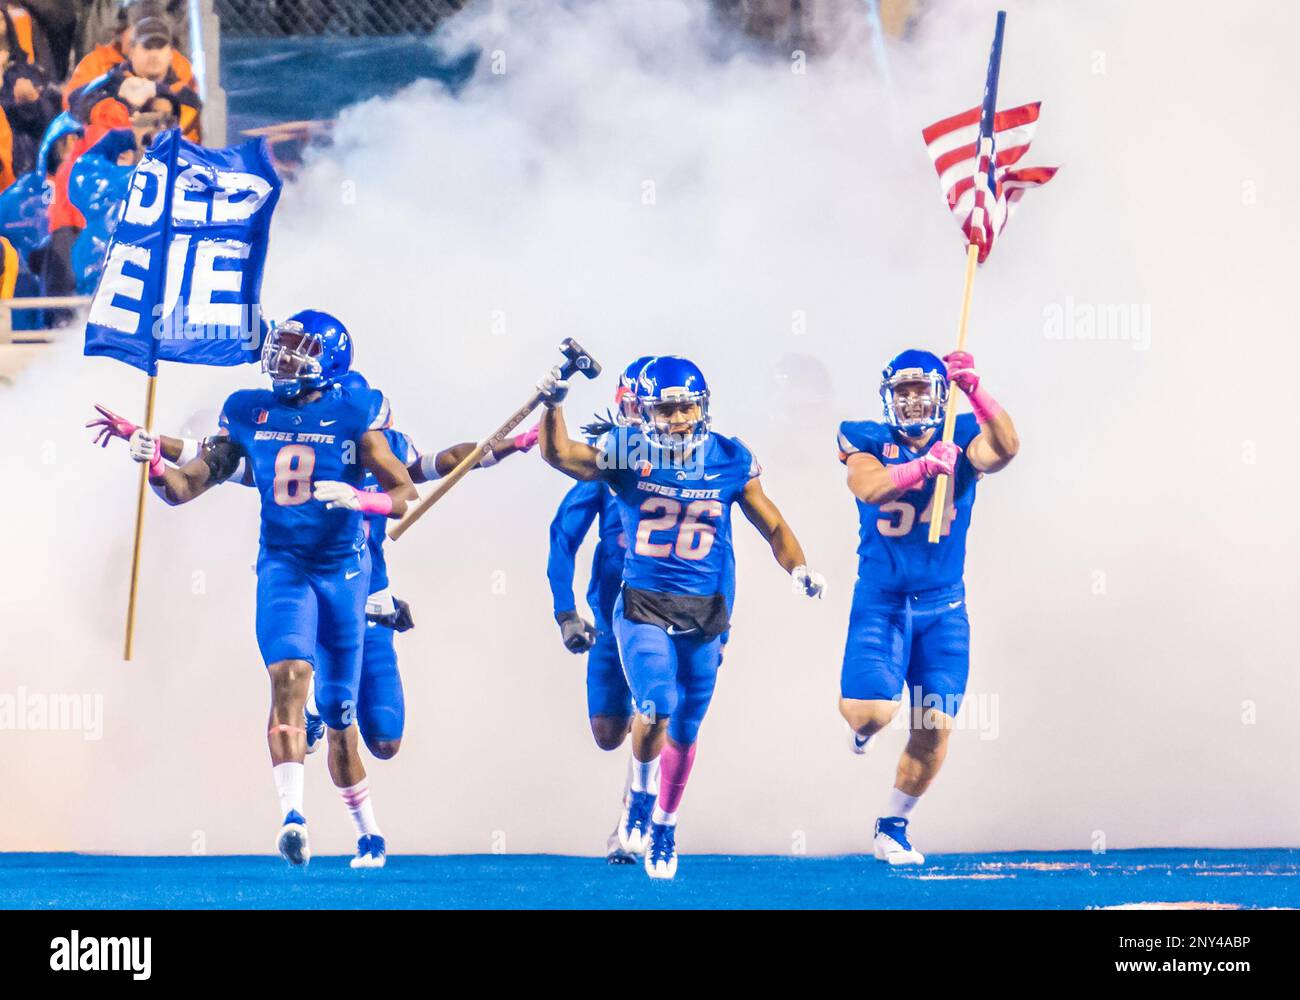 BOISE, ID - OCTOBER 21: Boise State Broncos cornerback Avery Williams (26)  leads his teammates onto the field with 'the hammer' during the regular  season game between the Wyoming Cowboys verses the